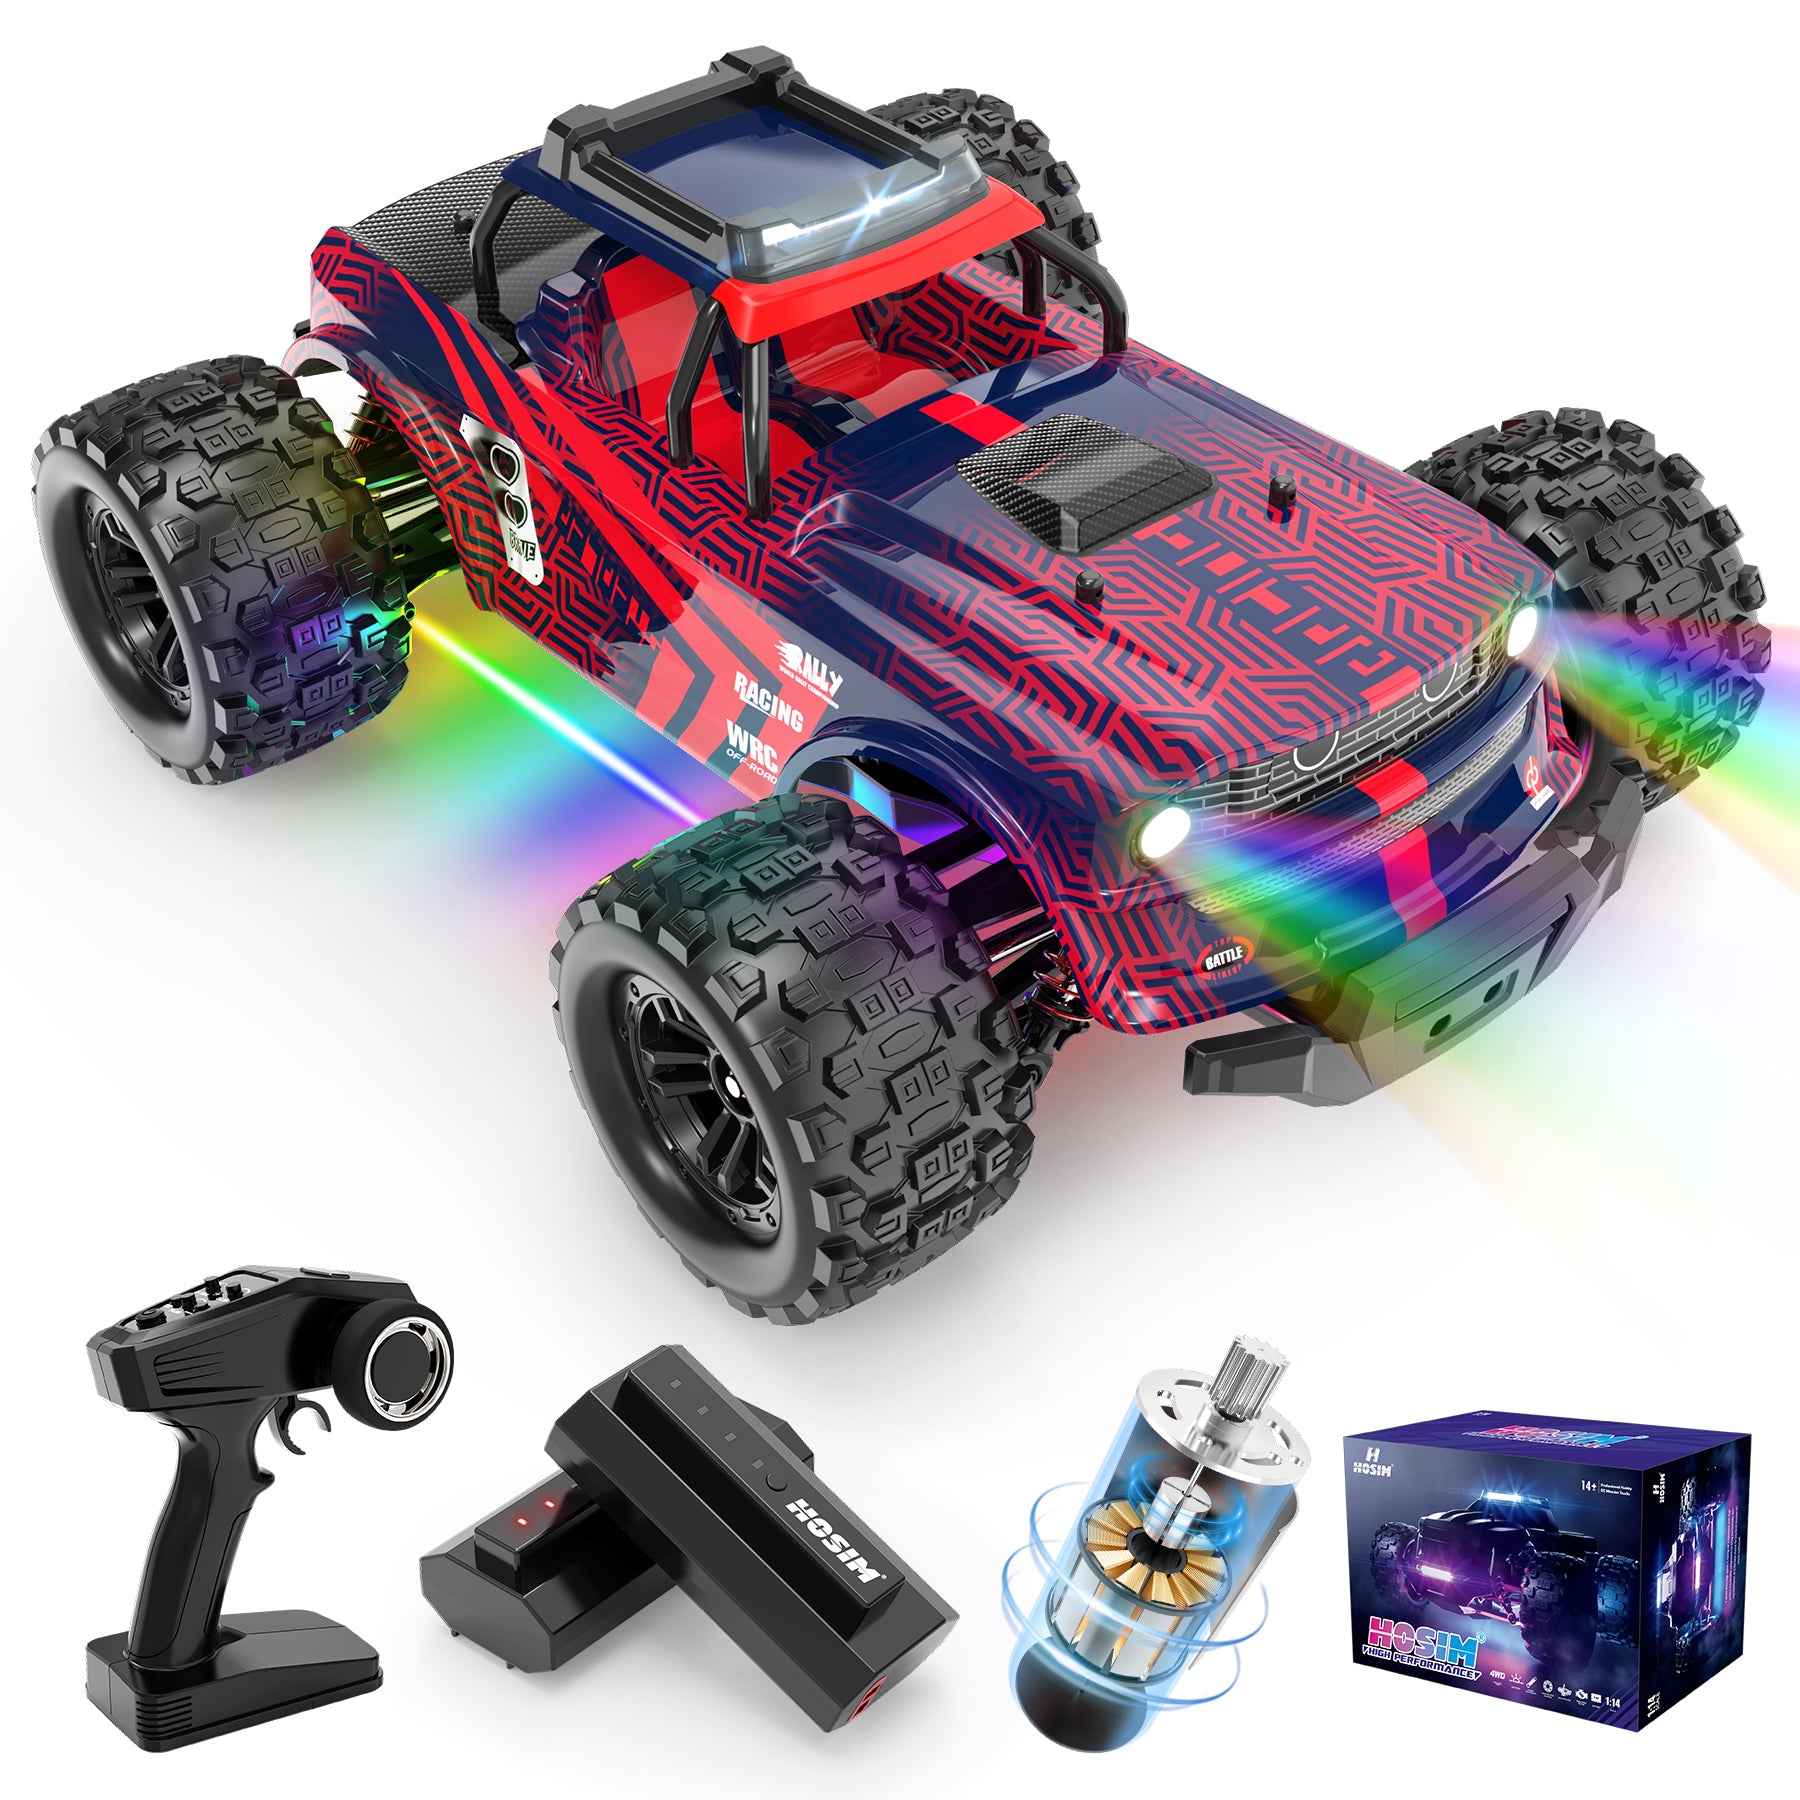 Hosim 1:14  RC Cars for Adults,Remote Control Car High Speed 40+ KPH Hobby Electric Off-Road Jumping RC Monster Truck Crawler Electric Vehicle Car Gift Toy